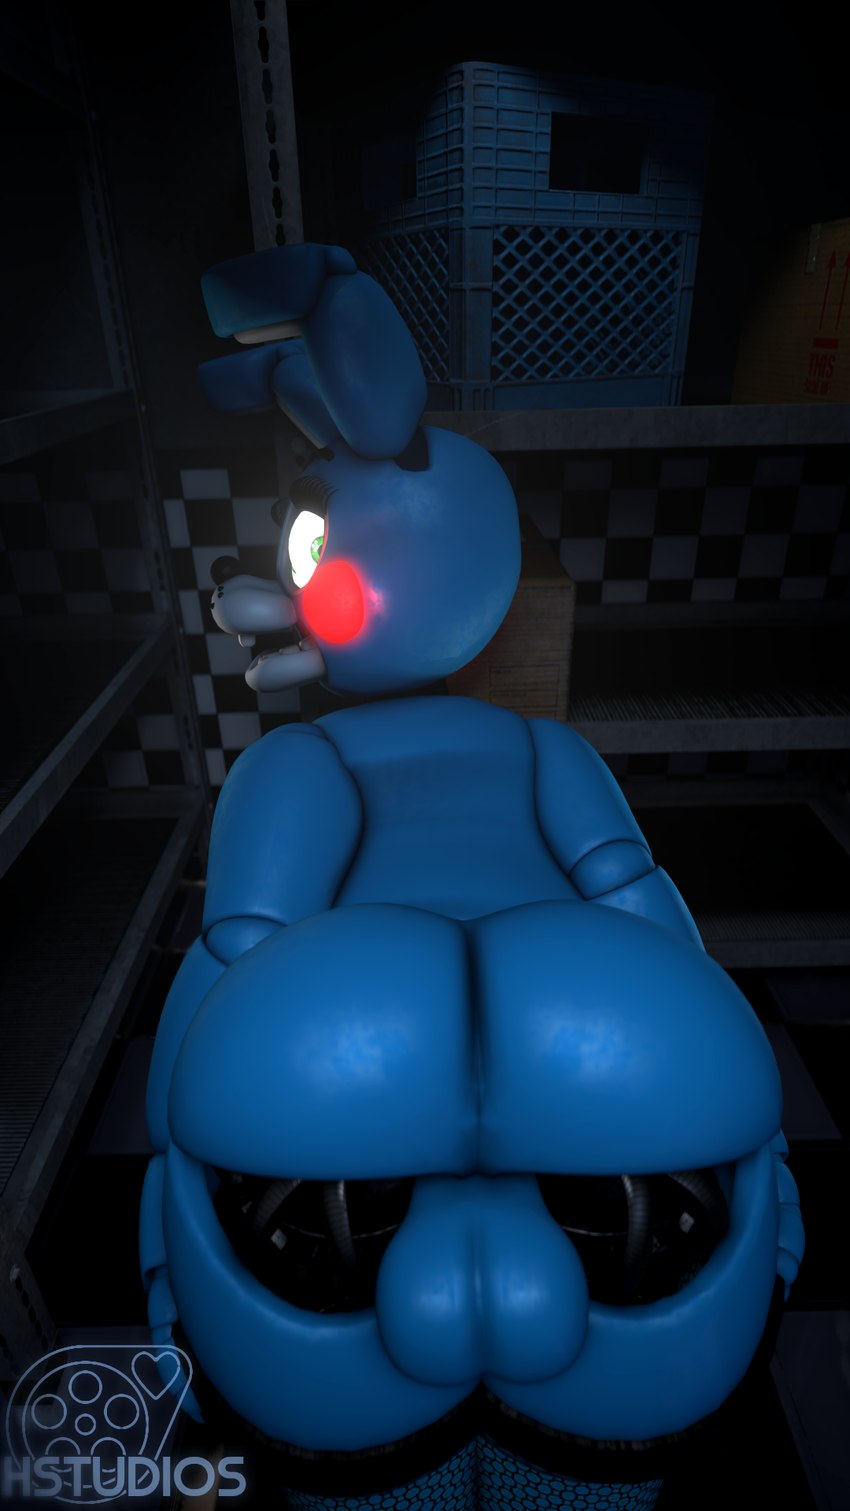 toy bonnie (five nights at freddy's 2 and etc) created by hstudios